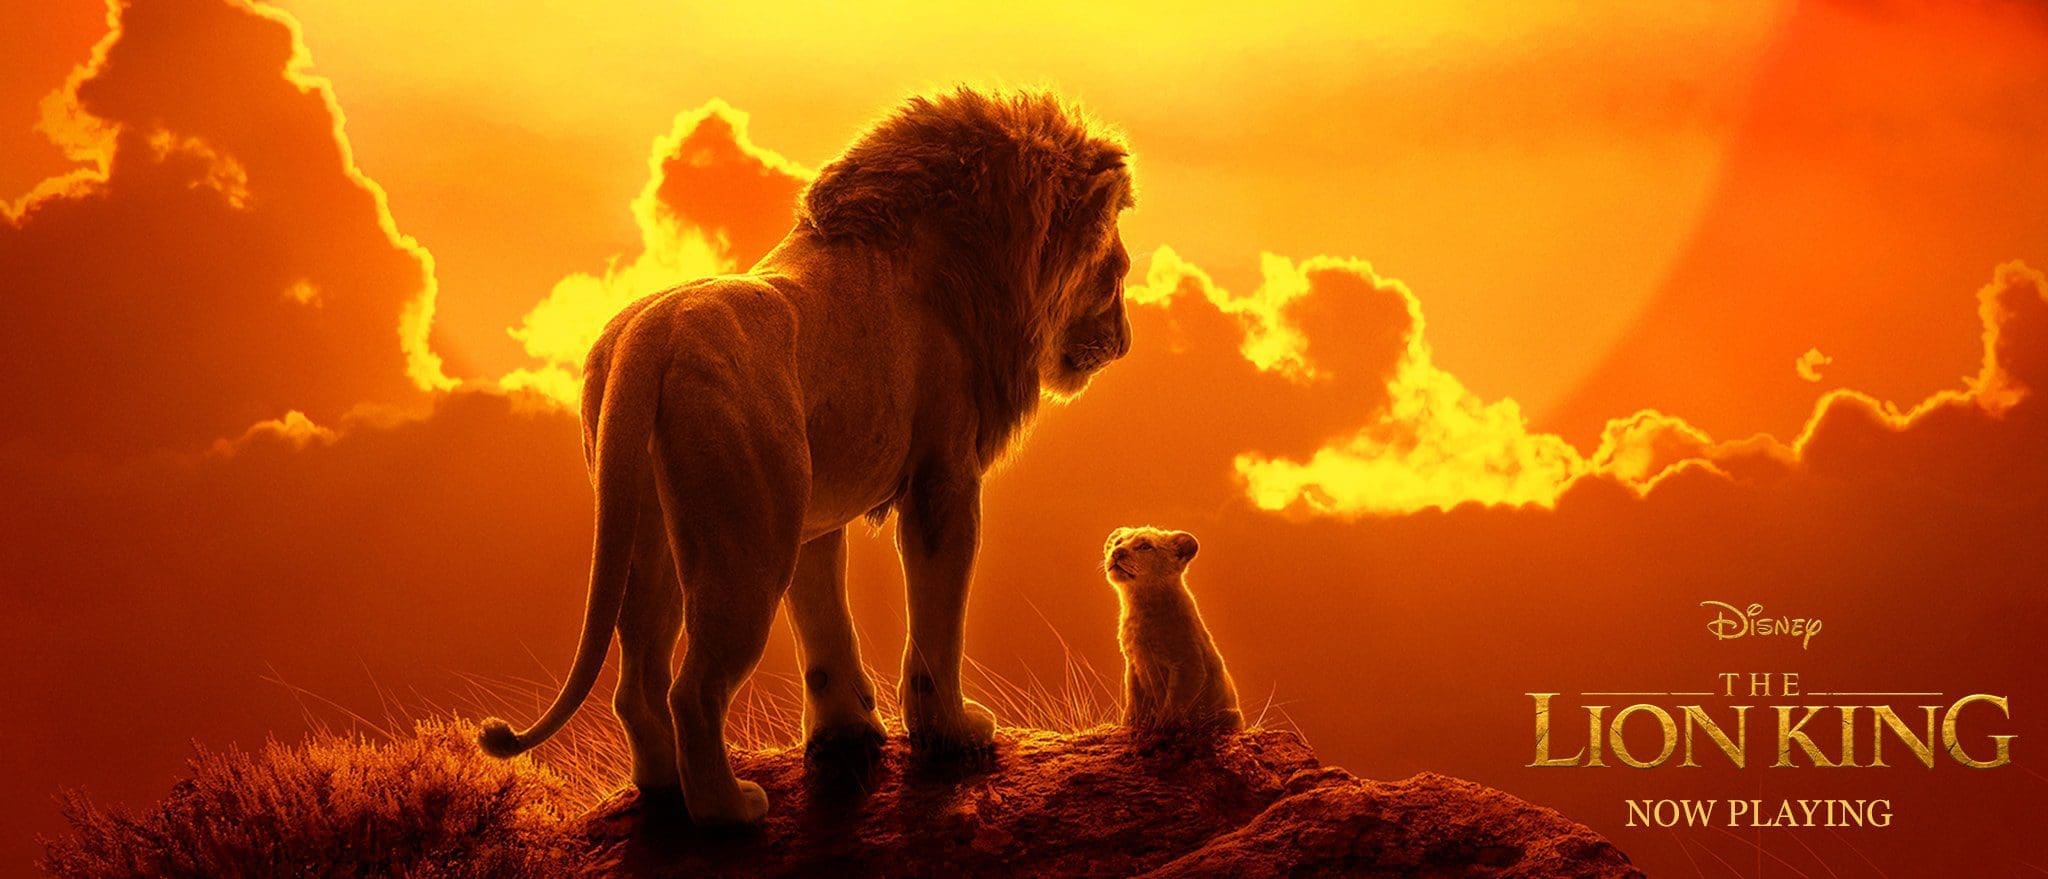 B Thelionking2019 Header Nowplaying 18094 28389be8